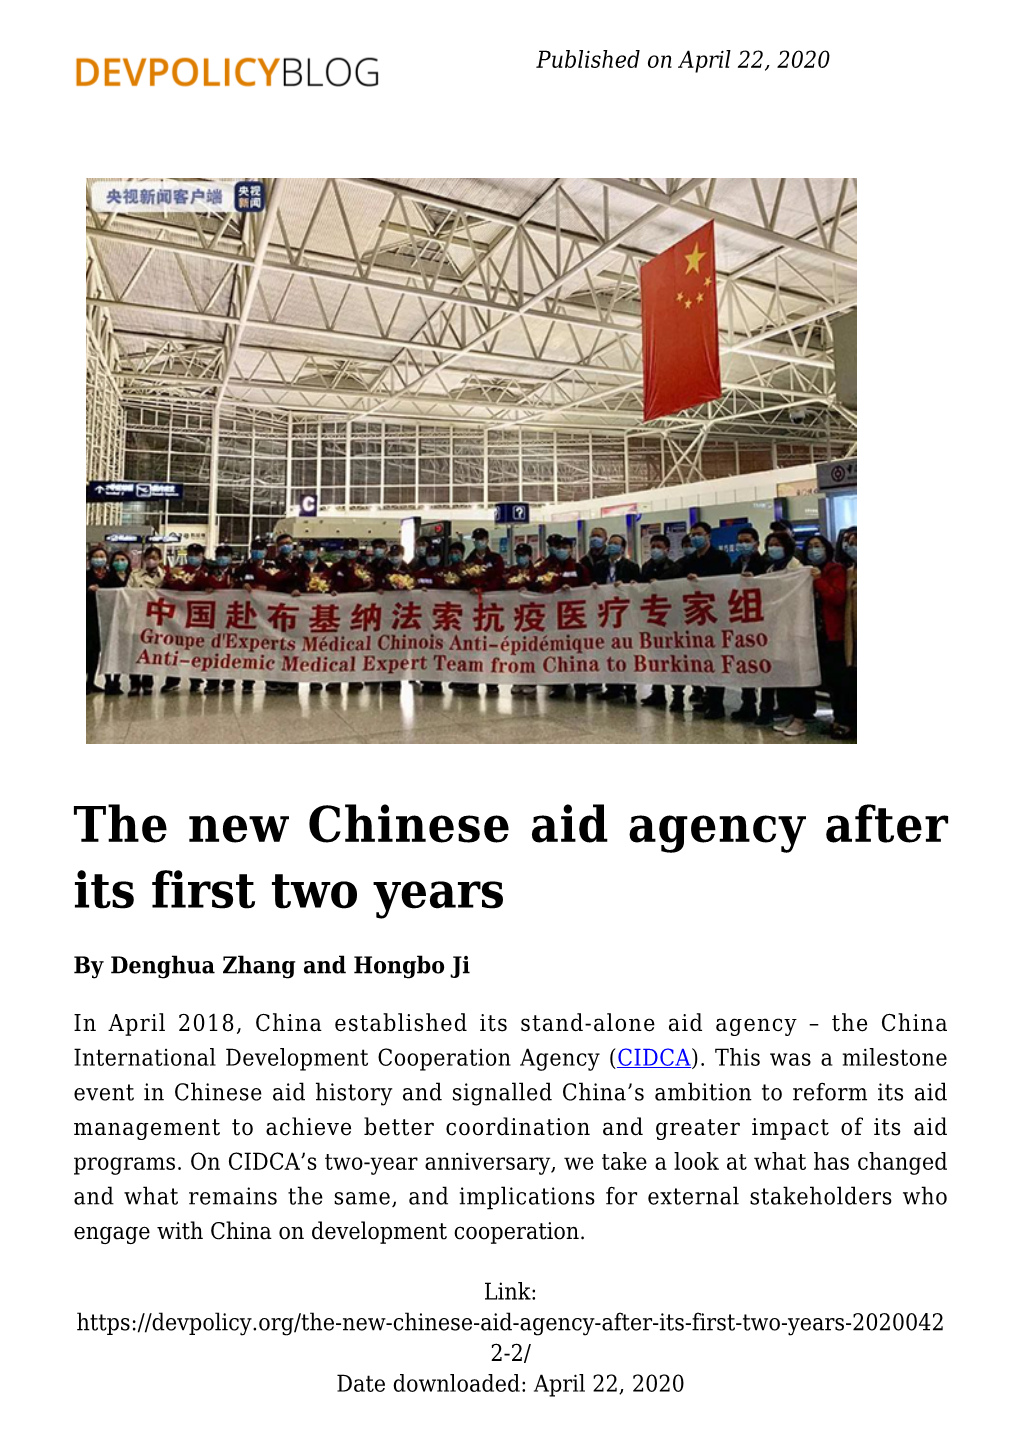 The New Chinese Aid Agency After Its First Two Years